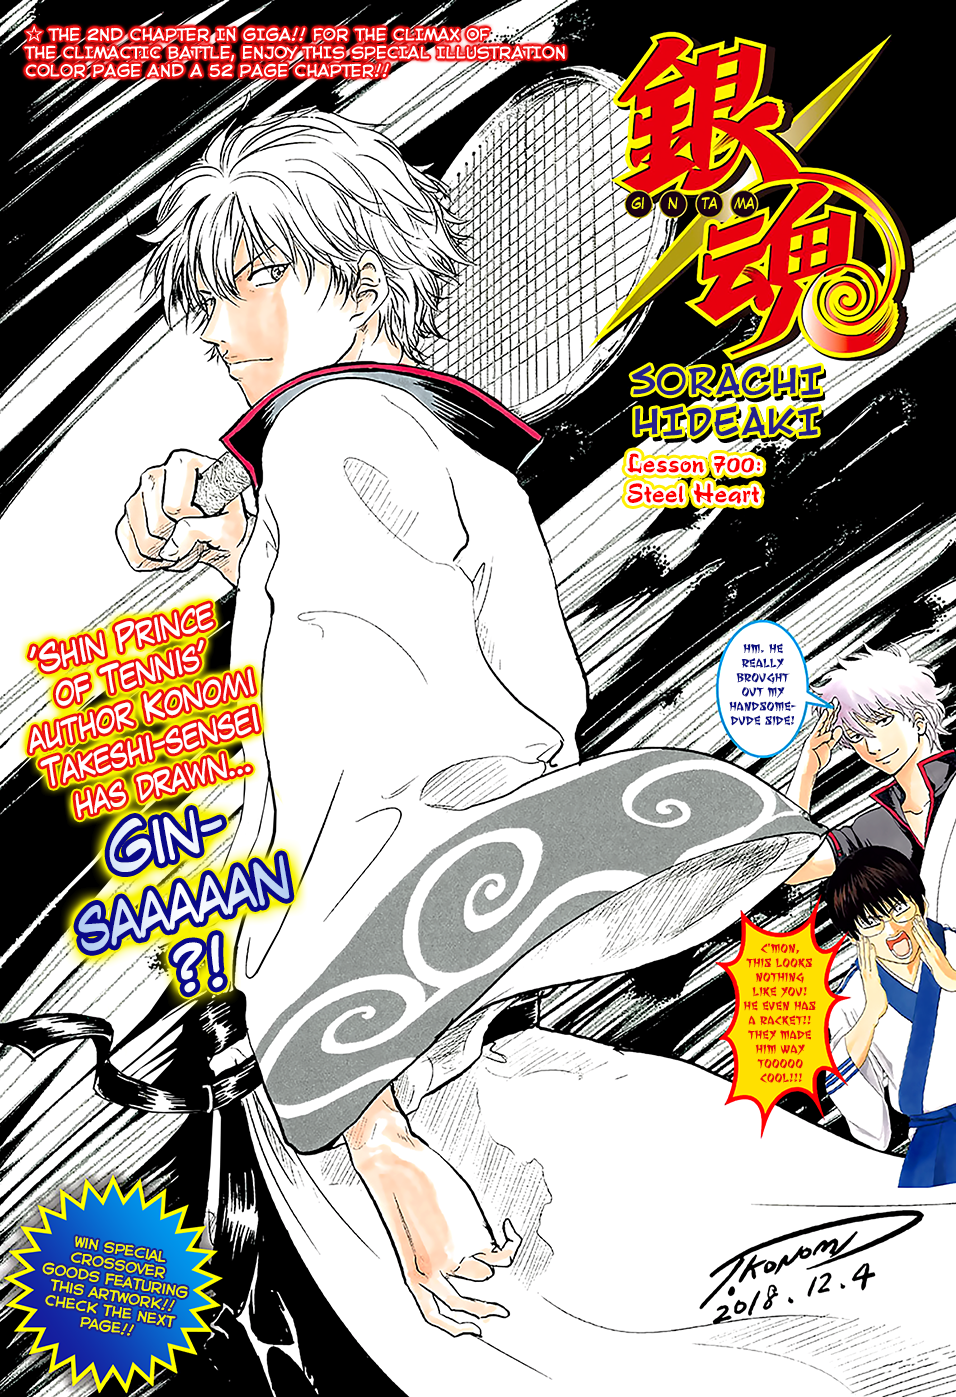 Gintama Vol.77 Chapter 700: Steel Heart - Picture 2